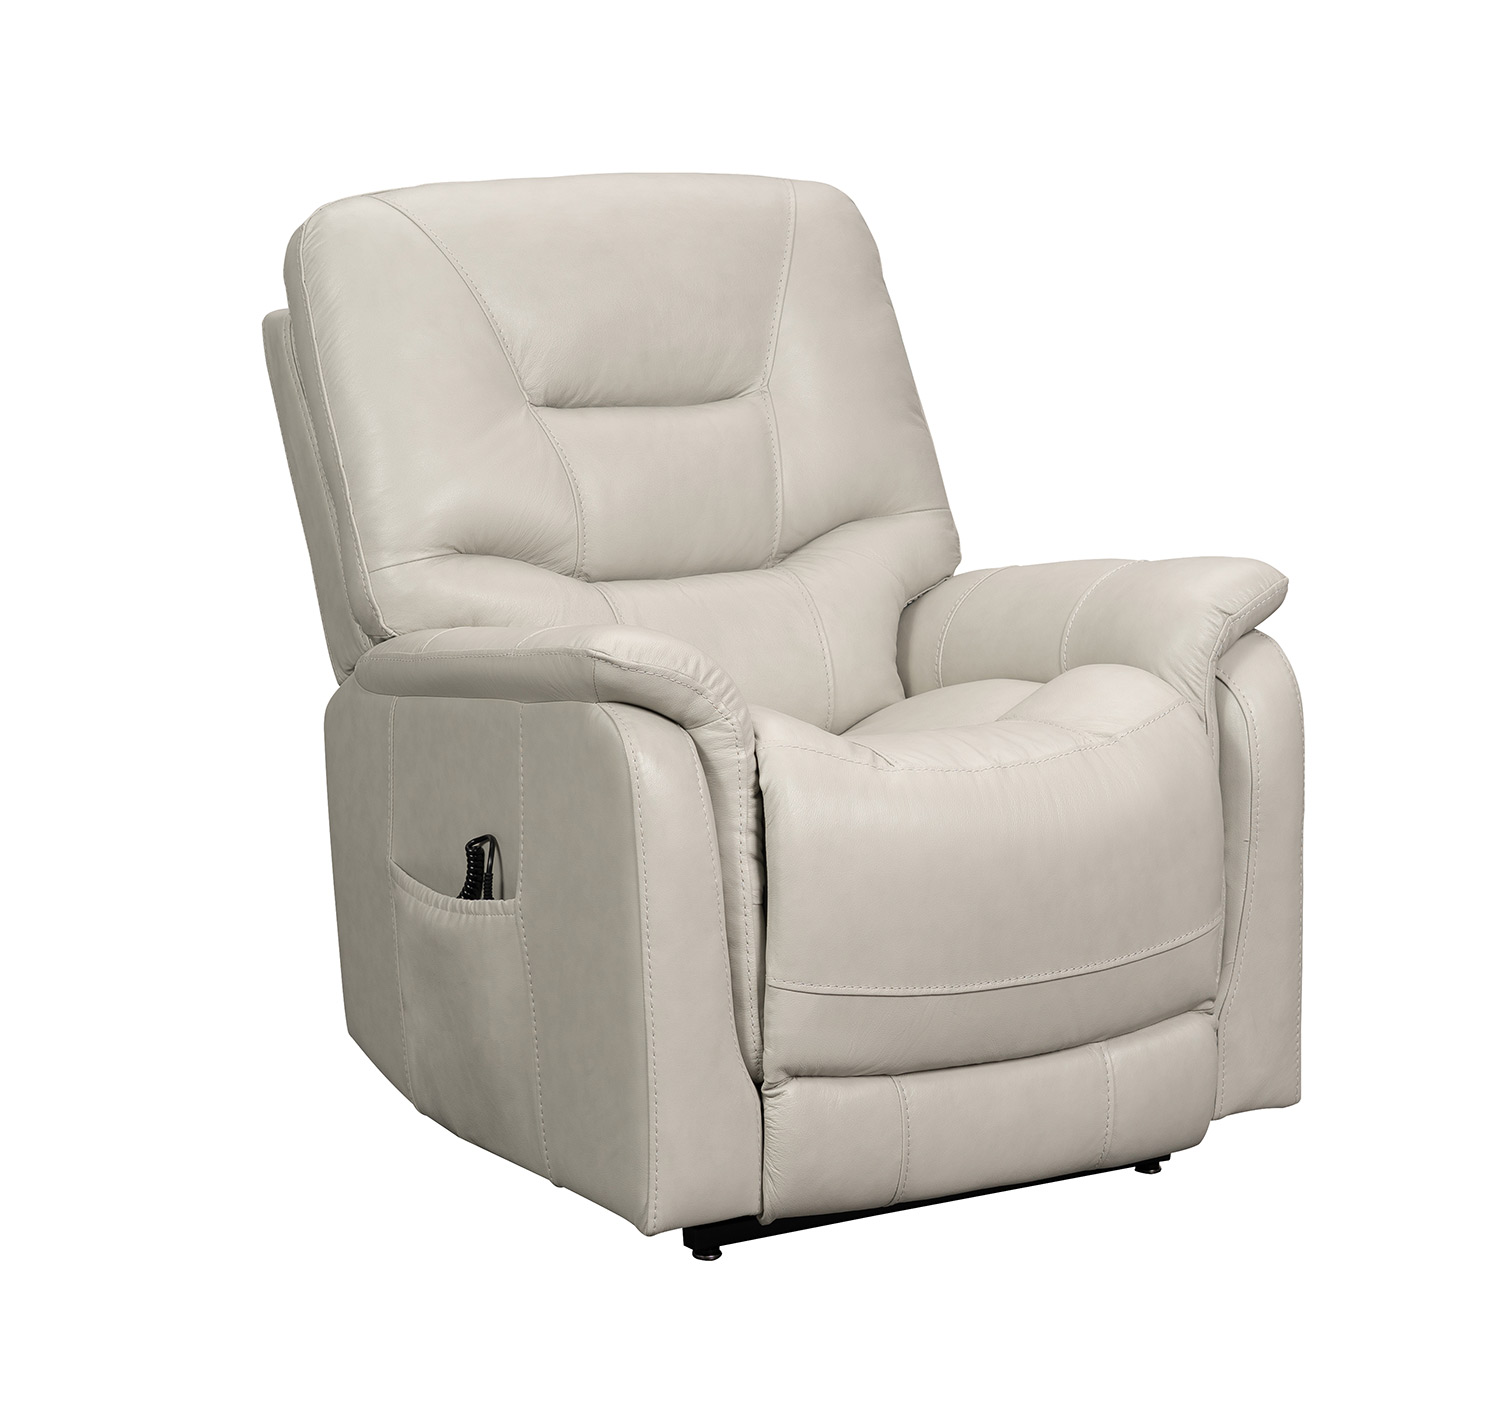 Barcalounger Lorence Lift Chair Recliner with Power Head Rest - Venzia Cream/Leather Match